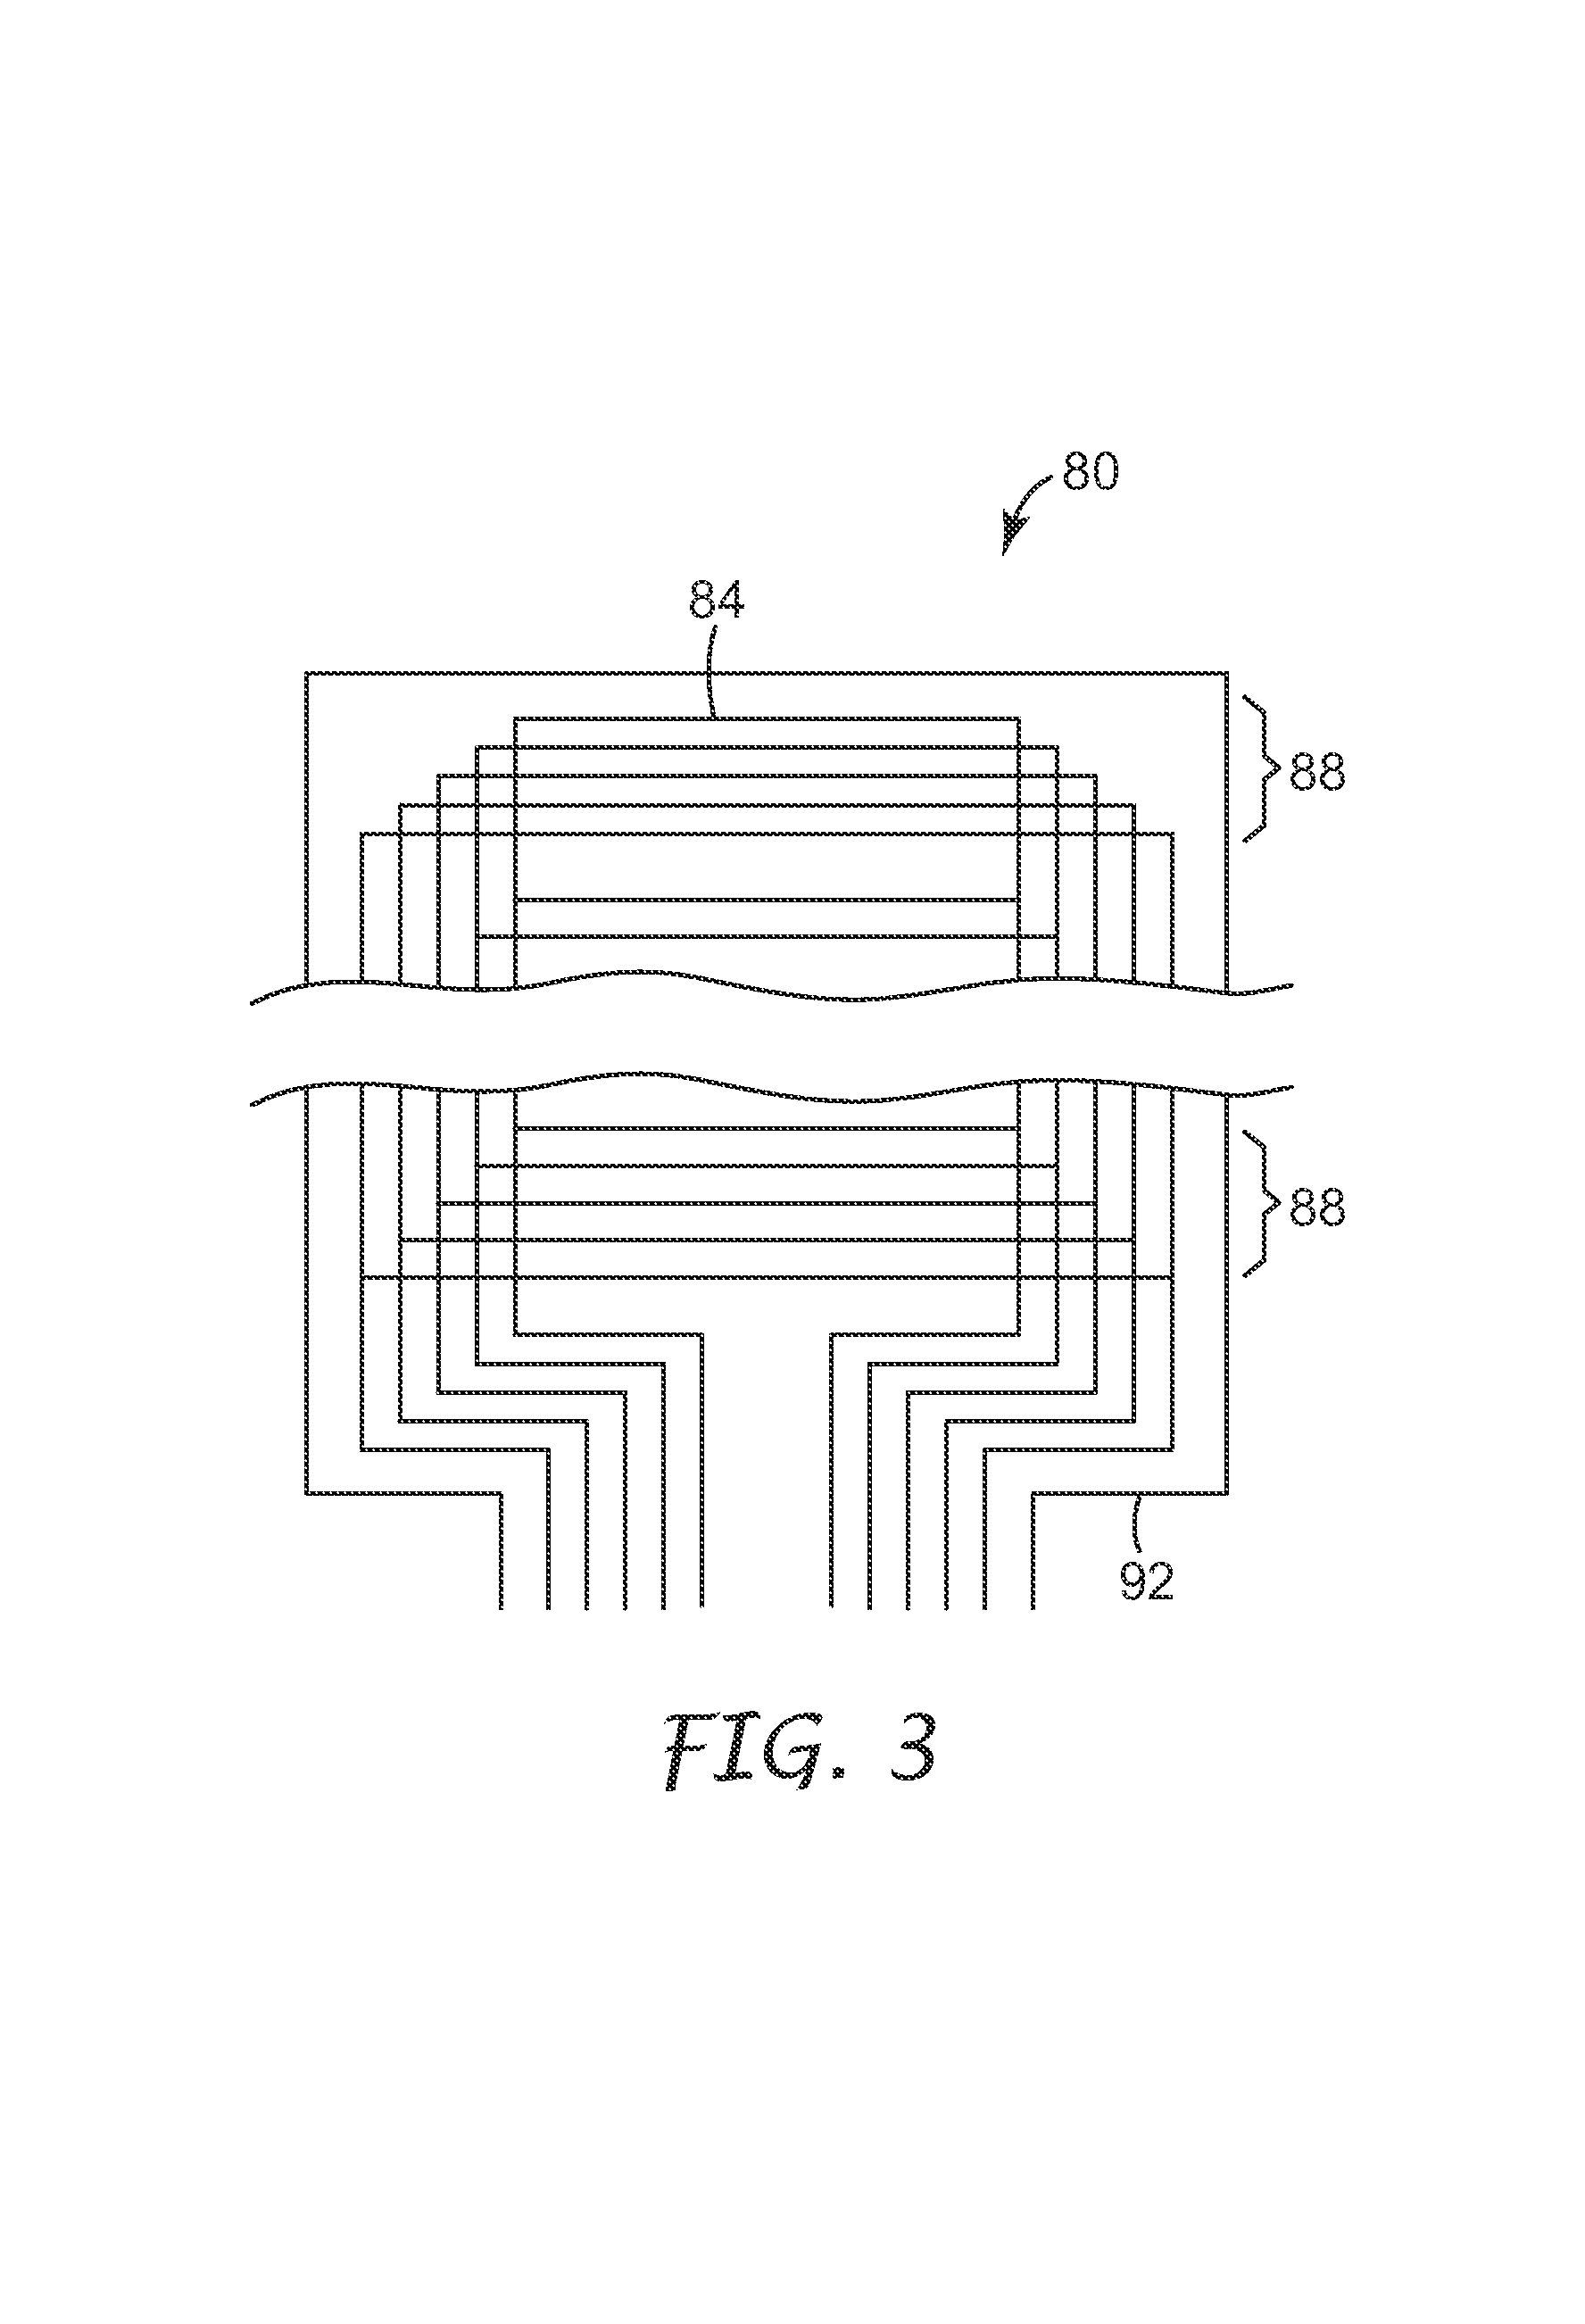 Capacitive touch screen with conductive polymer